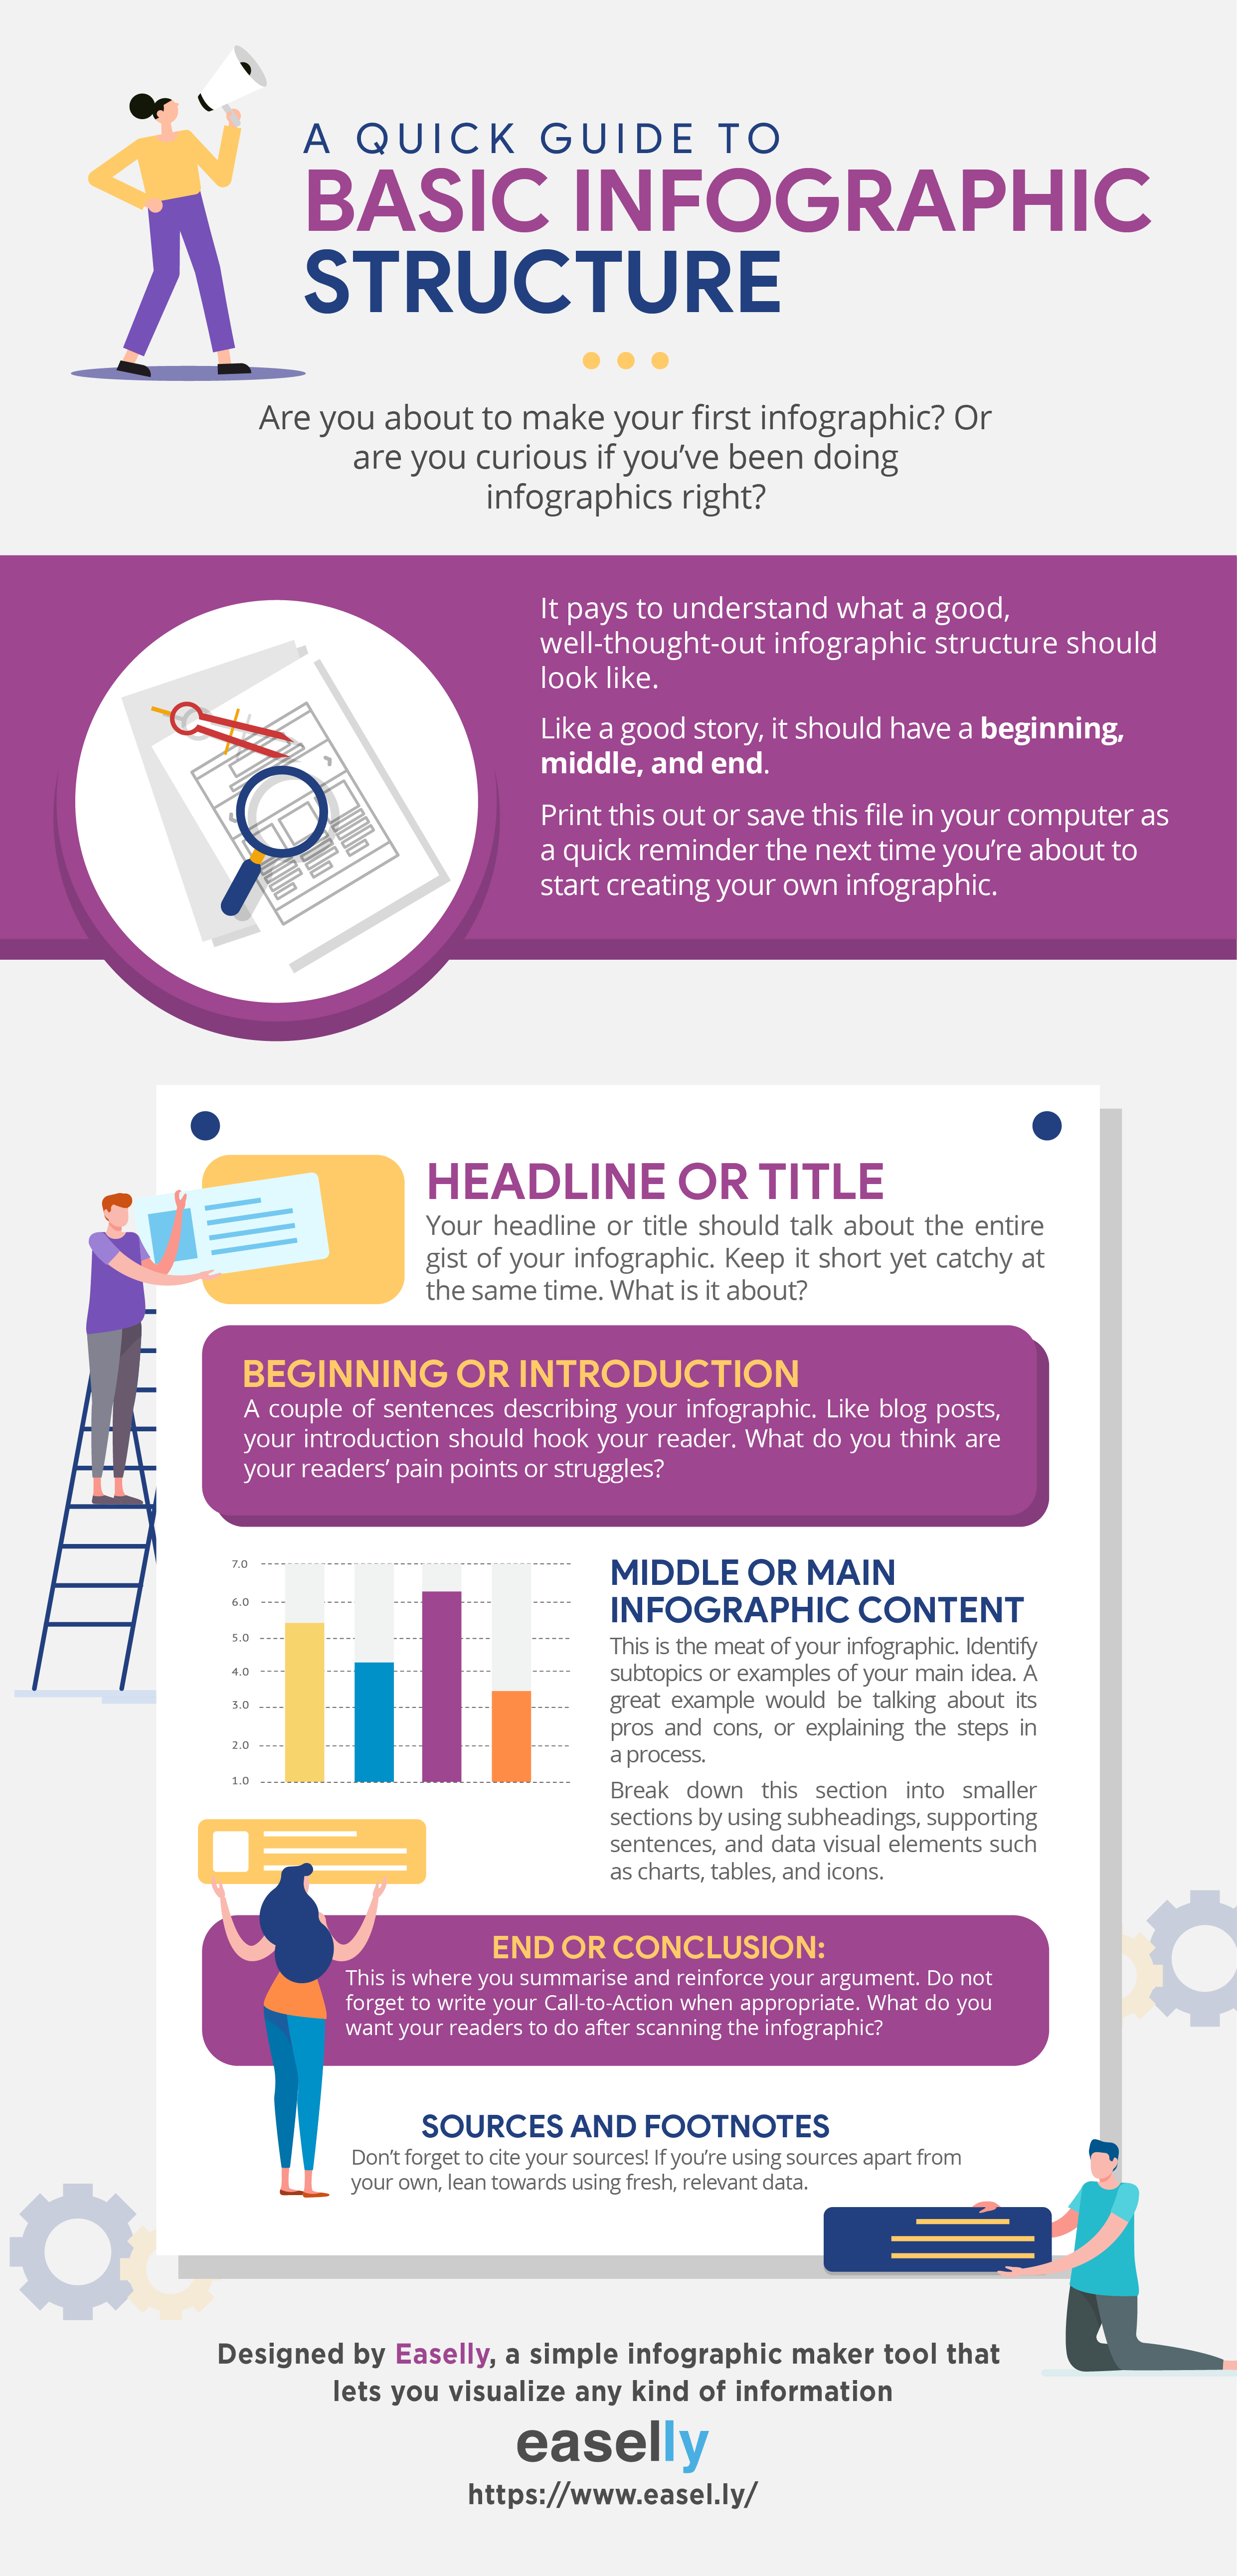 effective infographic examples